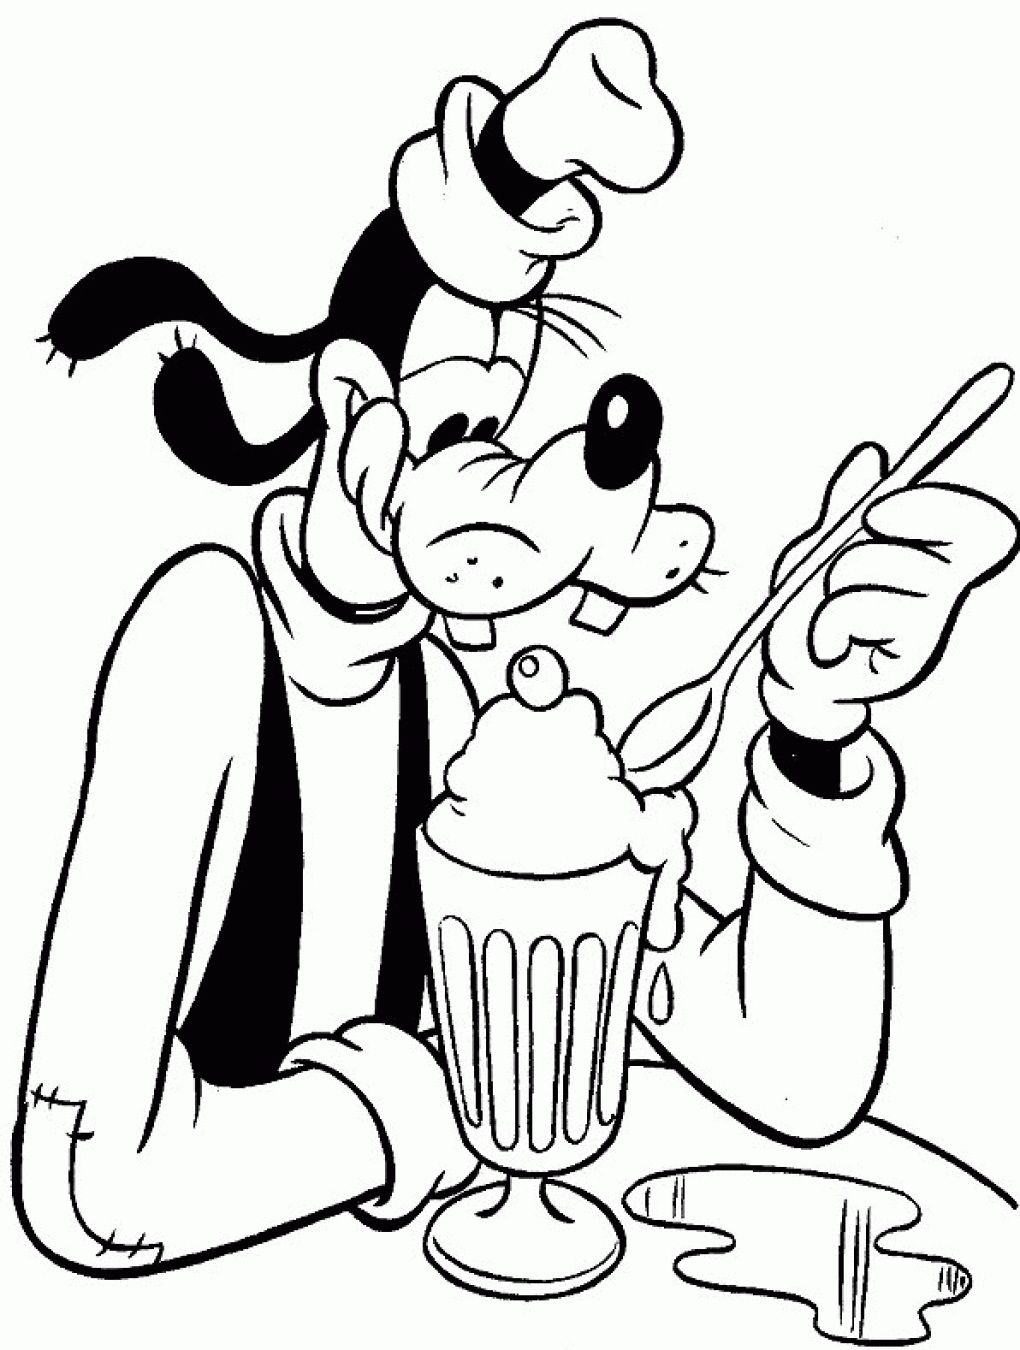 Goofy Coloring Pages And Book   UniqueColoringPages   Coloring Home